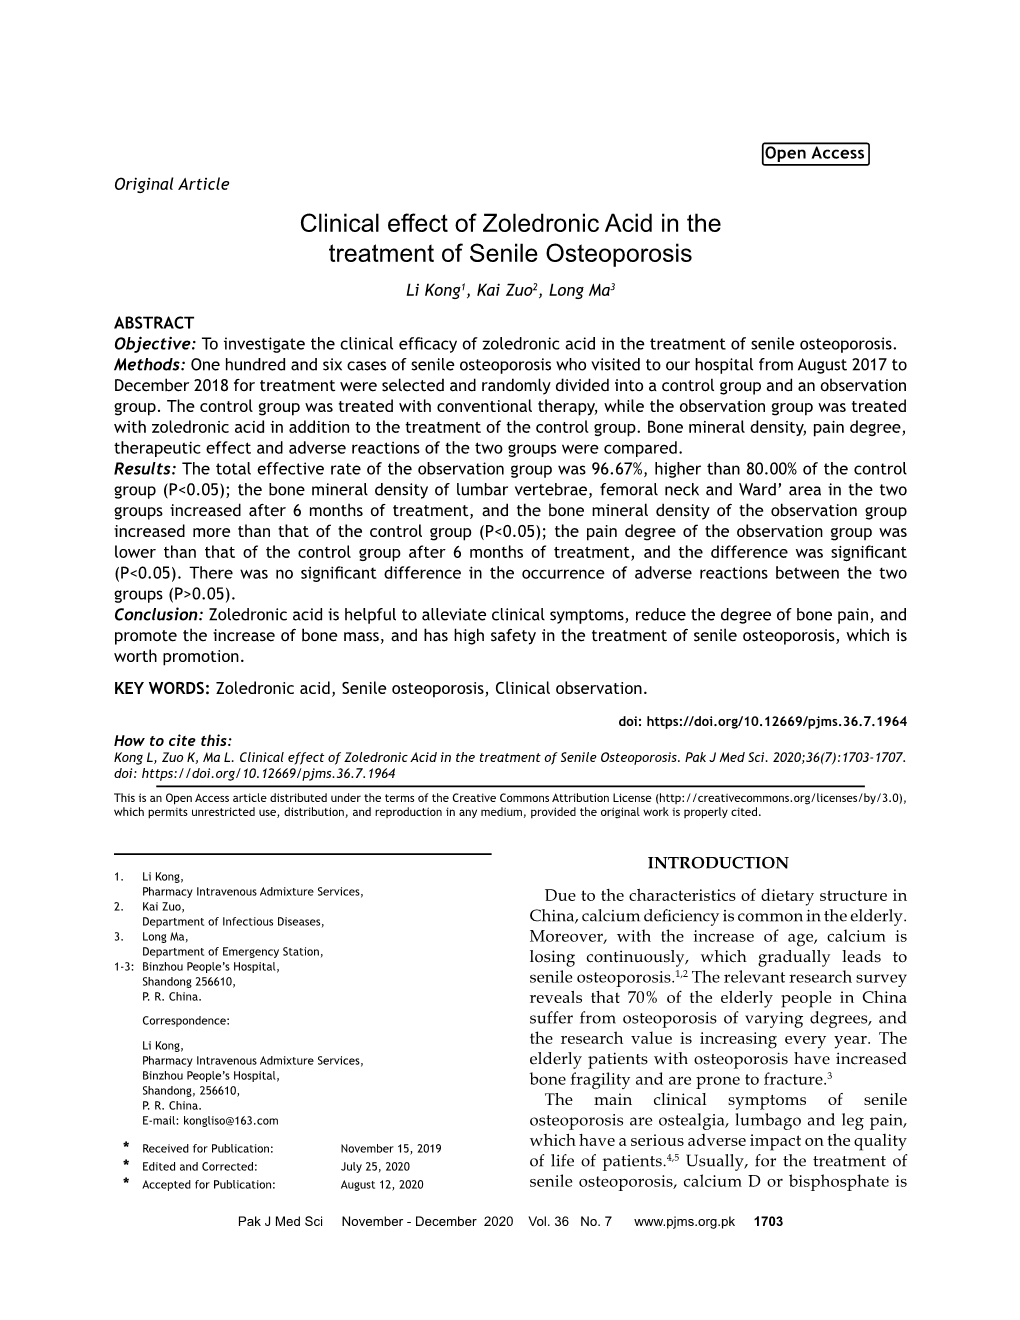 Clinical Effect of Zoledronic Acid in the Treatment of Senile Osteoporosis